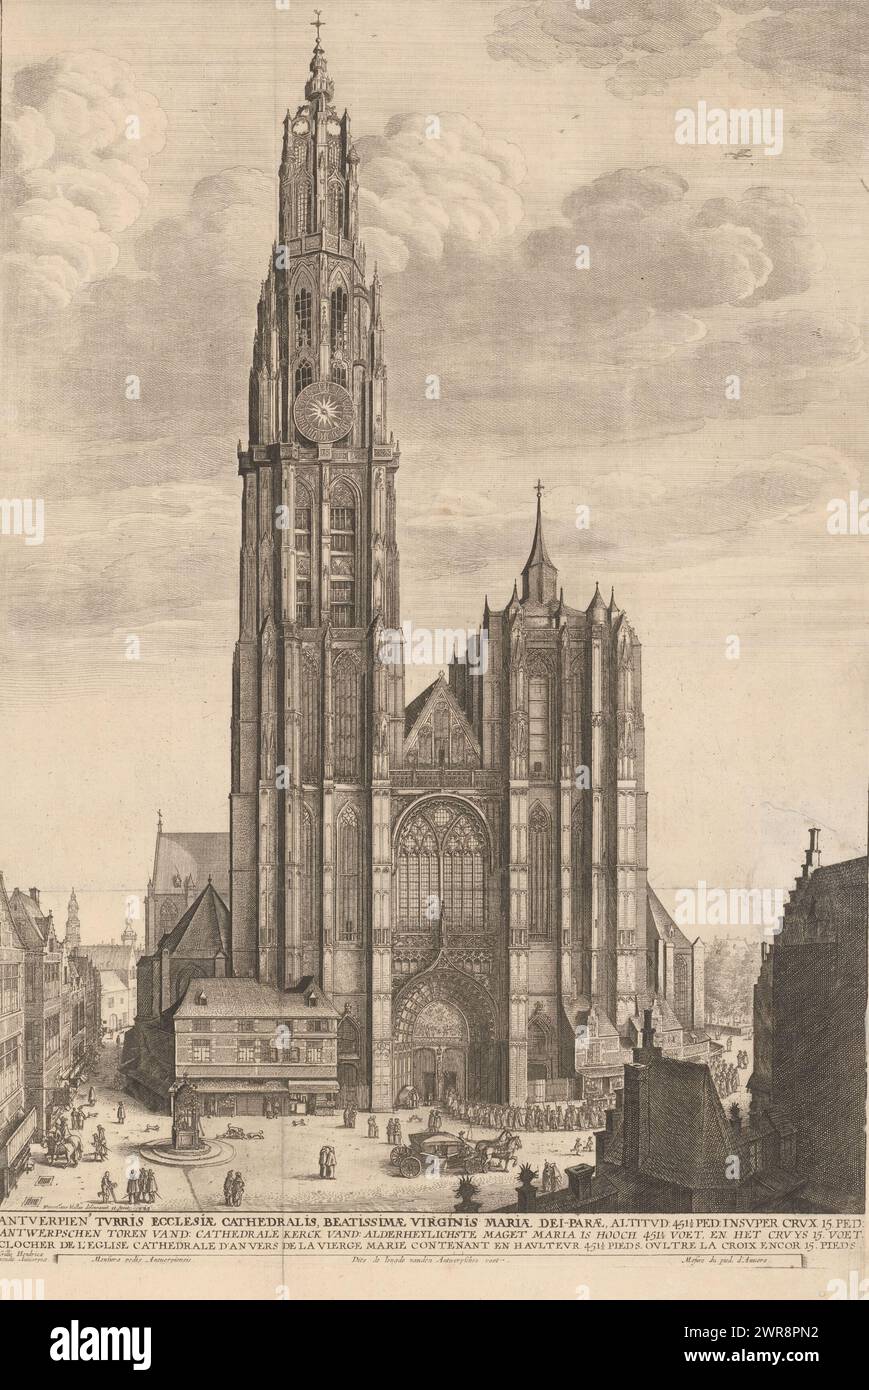 View of the Cathedral of Our Lady in Antwerp, Antverpien turris ecclesiae cathedralis, beatissimae virginis Mariae dei-parae (...) / Antwerp tower of (...) / Clocher de l'eglise cathedrale d'anvers (... ) (title on object), print maker: Wenceslaus Hollar, after own design by: Wenceslaus Hollar, publisher: Gilles Hendricx, Antwerp, 1649, paper, etching, height 483 mm × width 337 mm, print Stock Photo